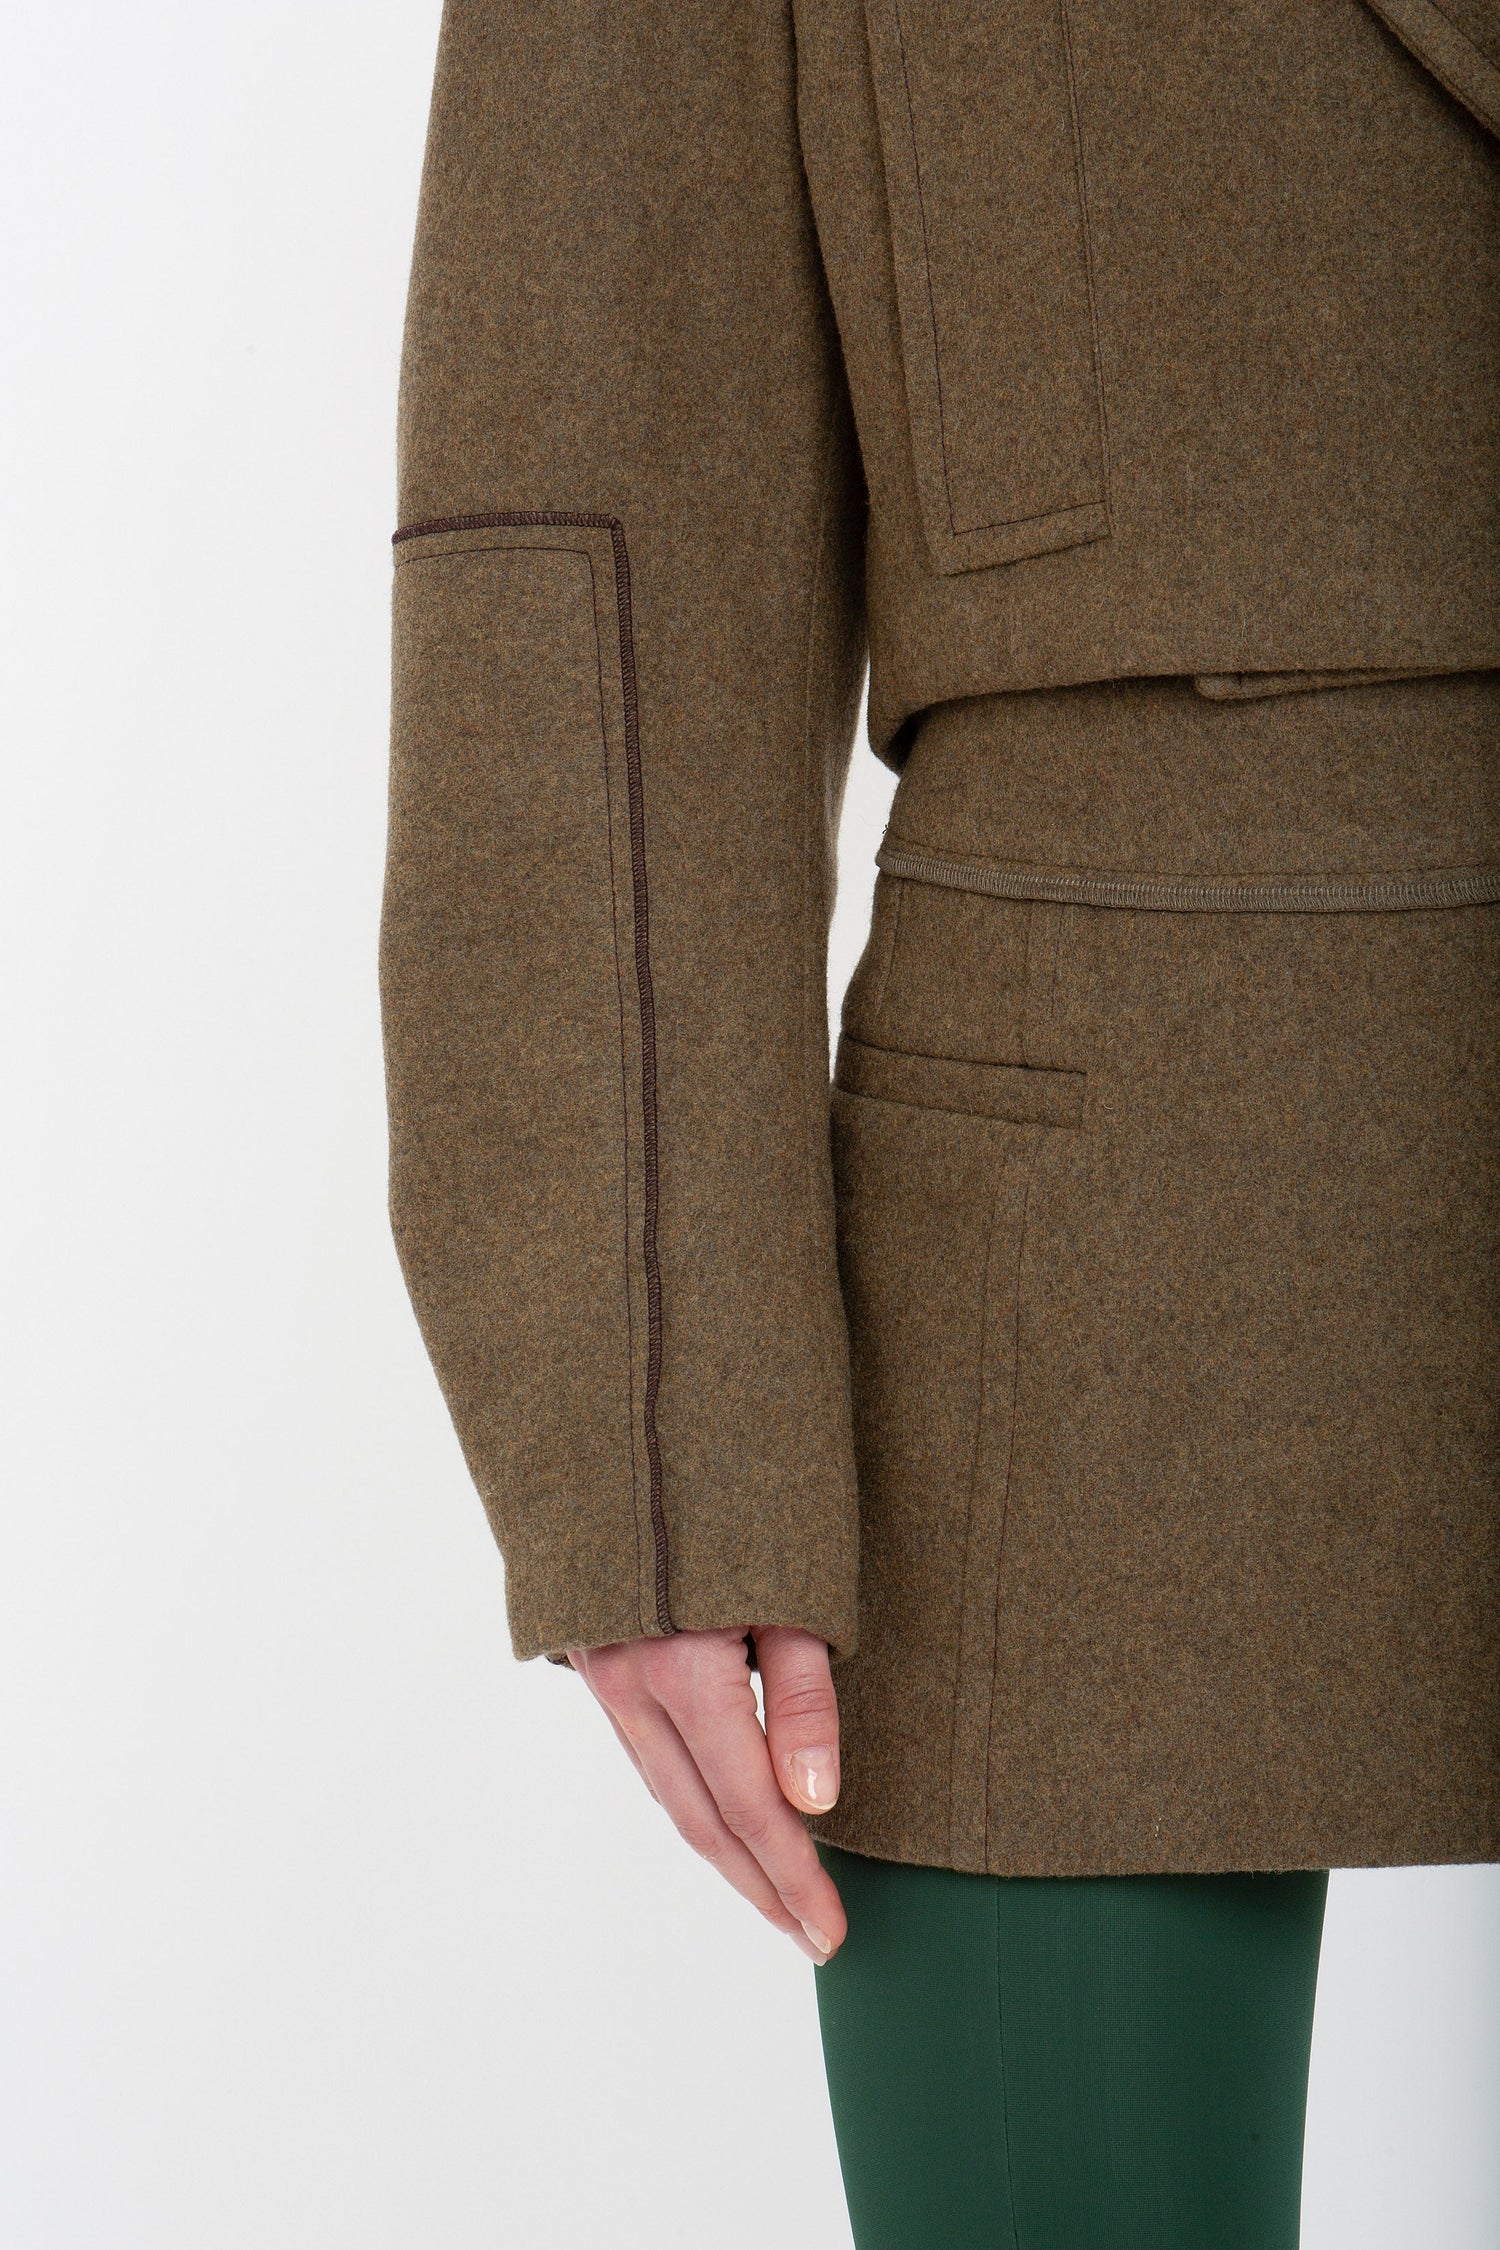 Close-up of a person wearing a Cropped Pea Coat In Khaki by Victoria Beckham with visible seams and green pants, showing the left side of the coat with one arm partially visible.